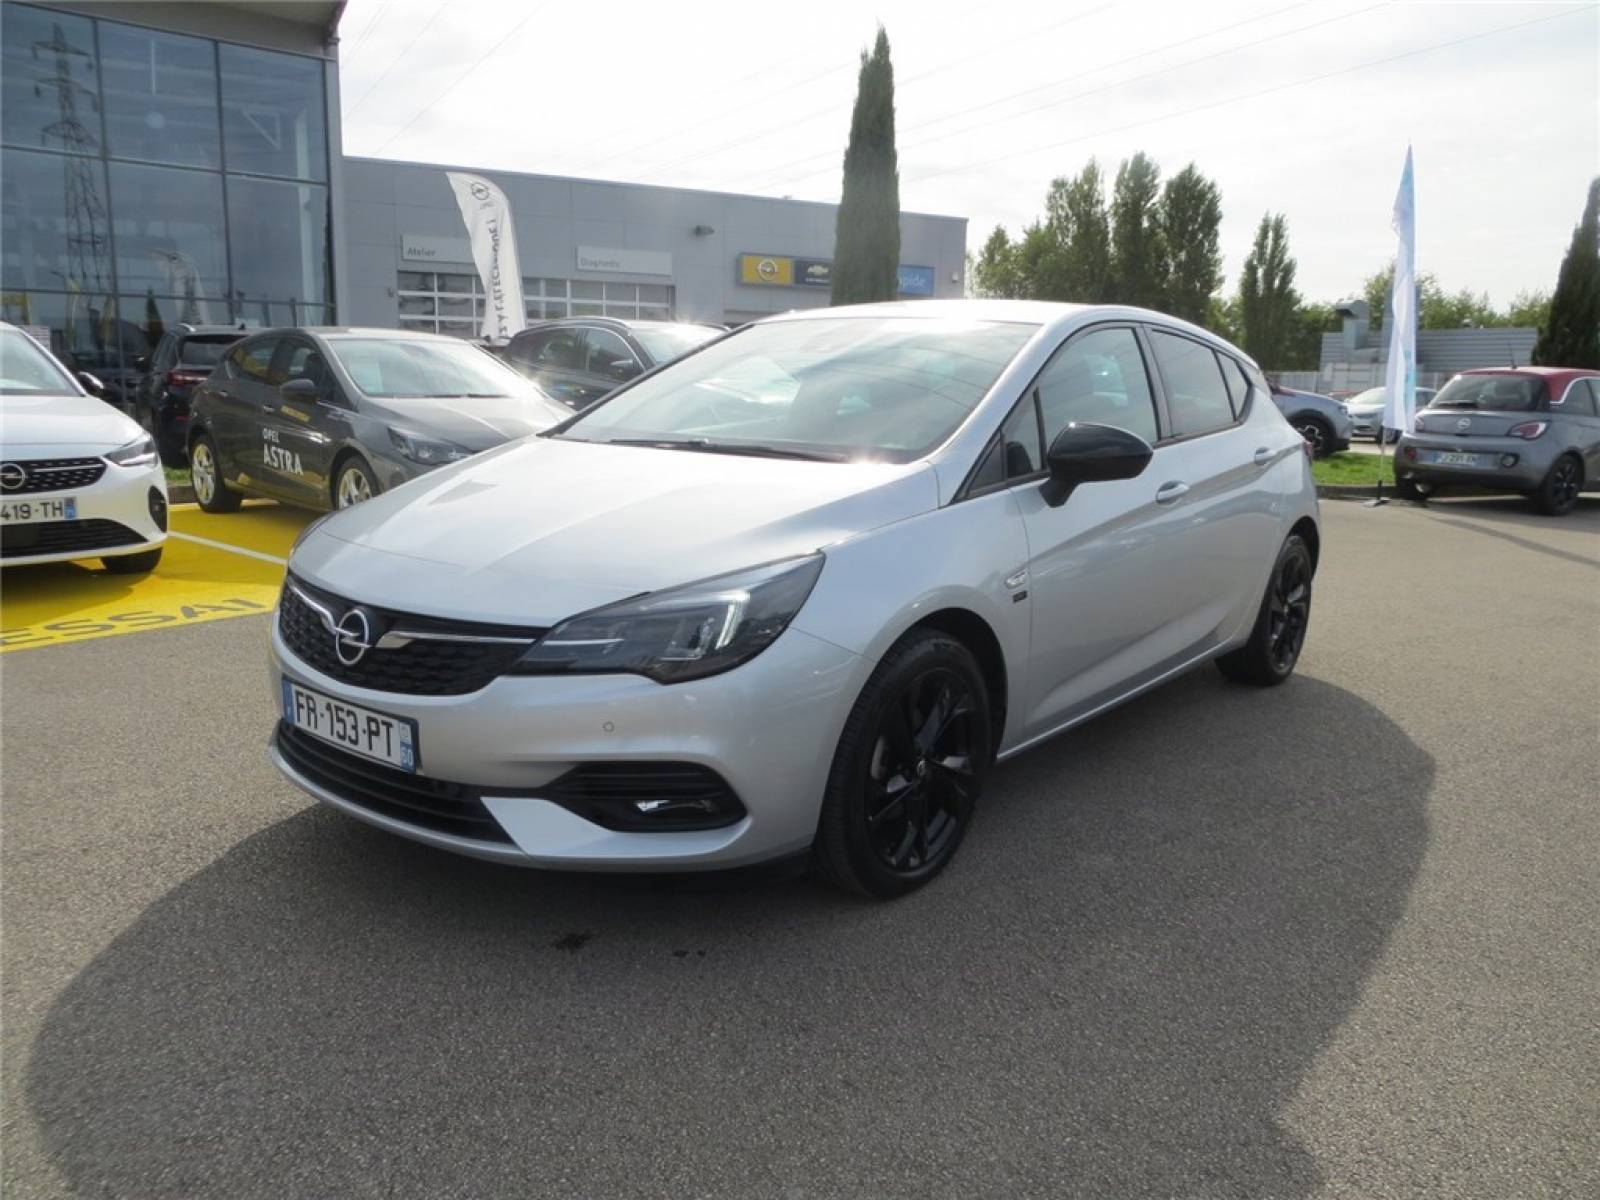 OPEL Astra 1.2 Turbo 130 ch BVM6 - véhicule d'occasion - Groupe Guillet - Opel Magicauto - Chalon-sur-Saône - 71380 - Saint-Marcel - 1